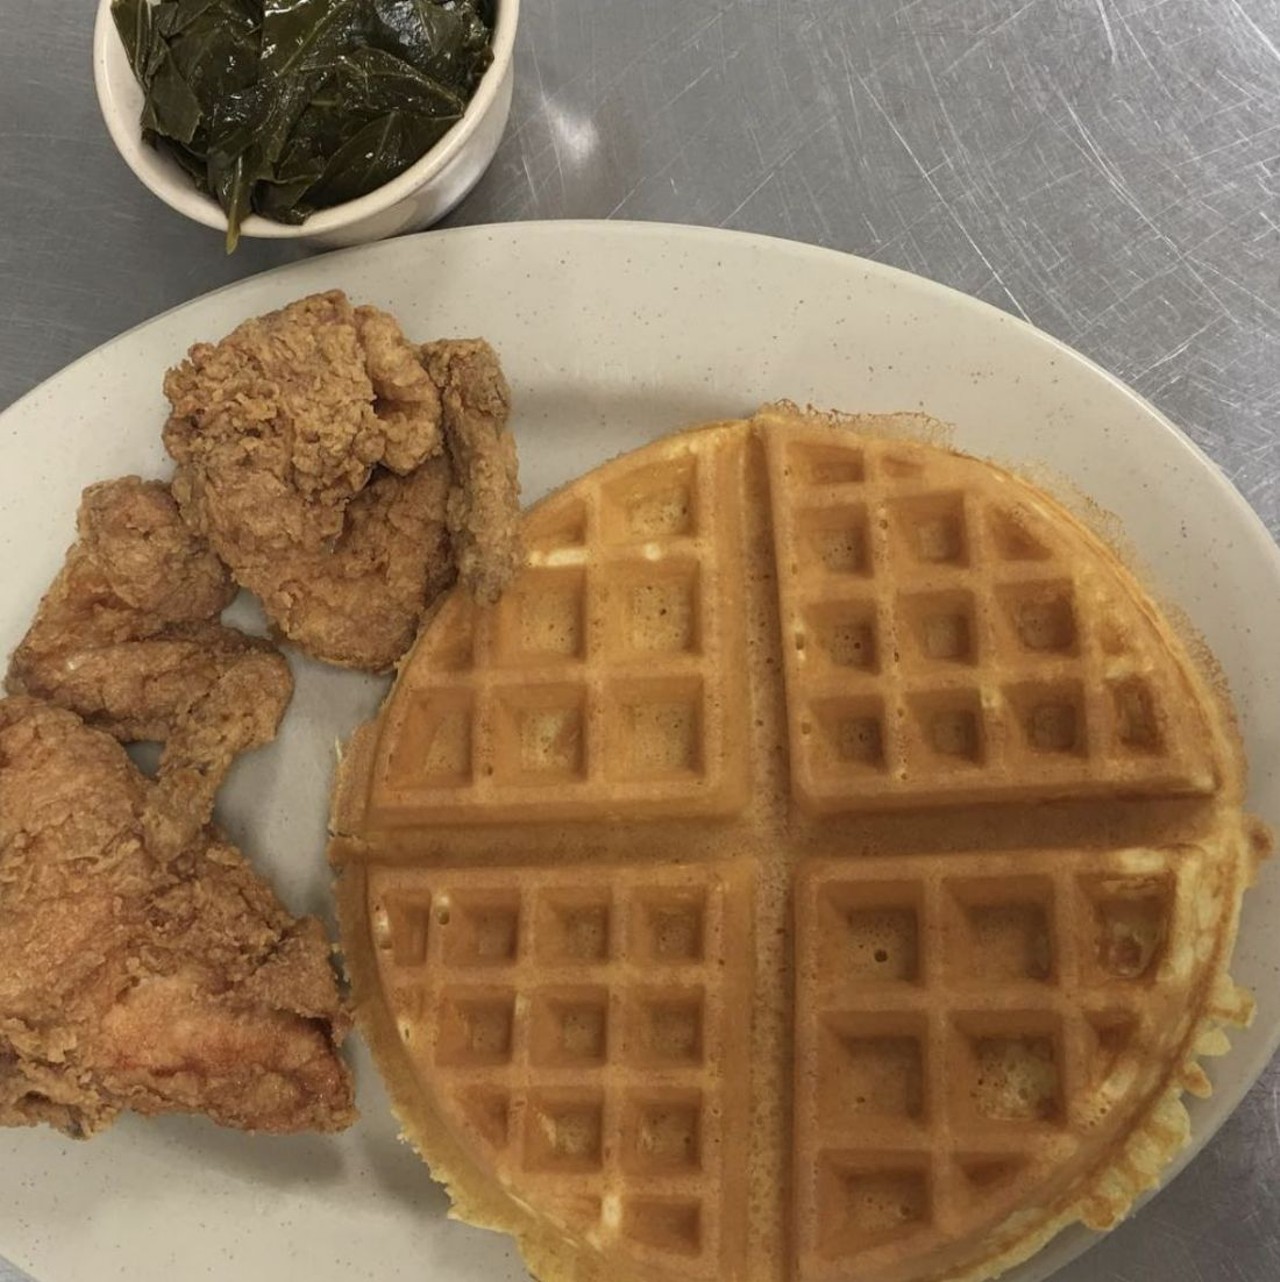 Urban Soul Restaurant
1535 E Lafayette St, Detroit, MI 48207
Urban Soul Restaurant is a little bit more sophisticated than the average family restaurant, but don&#146;t worry, your kids will love the chicken and waffles and anything off the dessert menu.
Photo courtesy of @urban_soul_restaurant